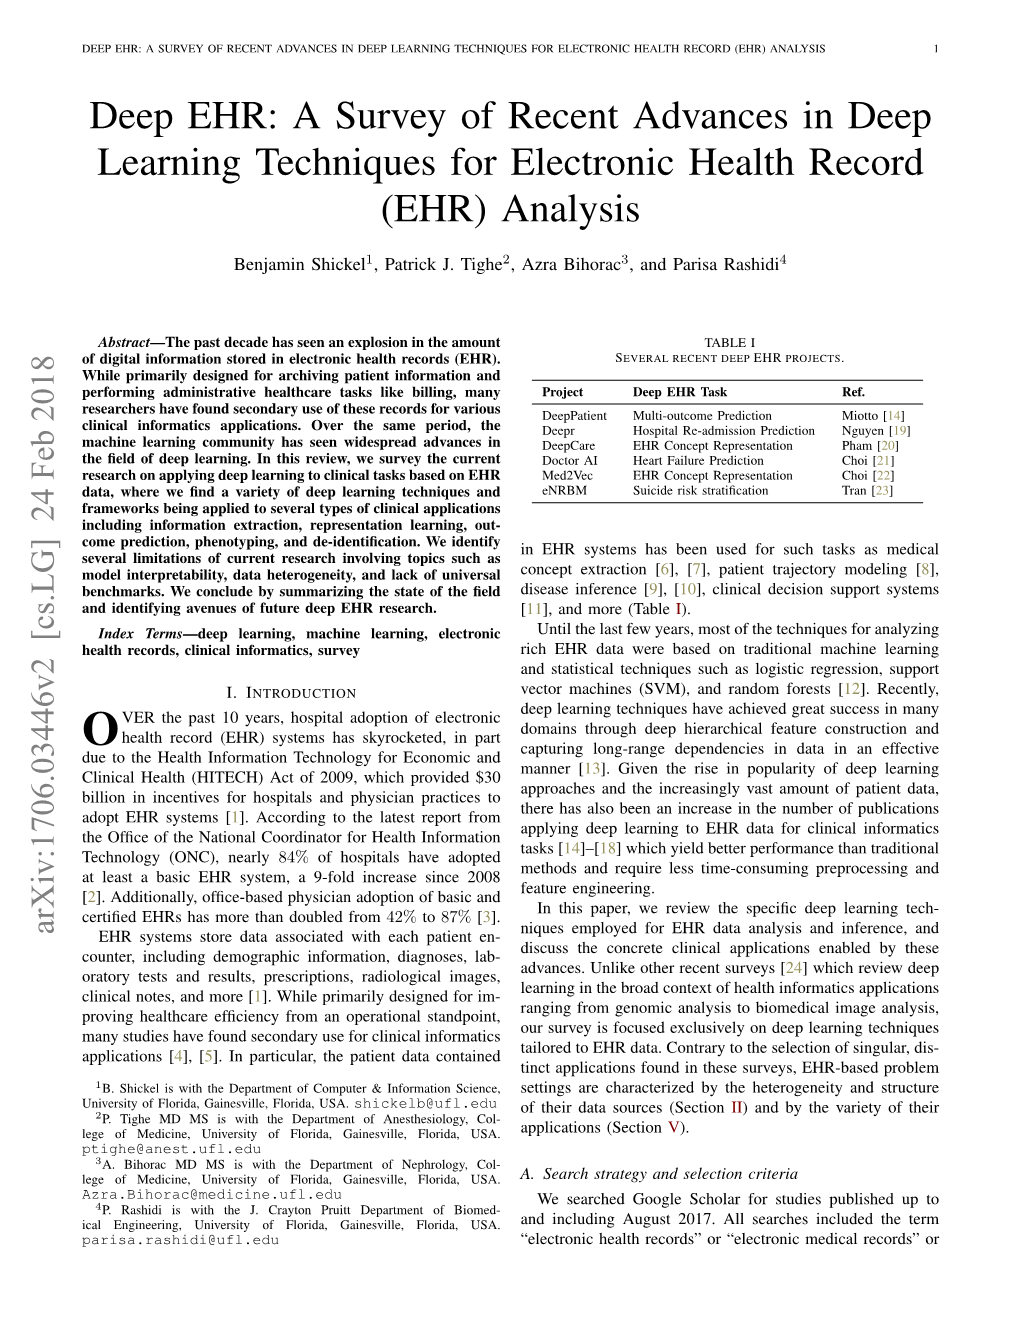 A Survey of Recent Advances in Deep Learning Techniques for Electronic Health Record (Ehr) Analysis 1